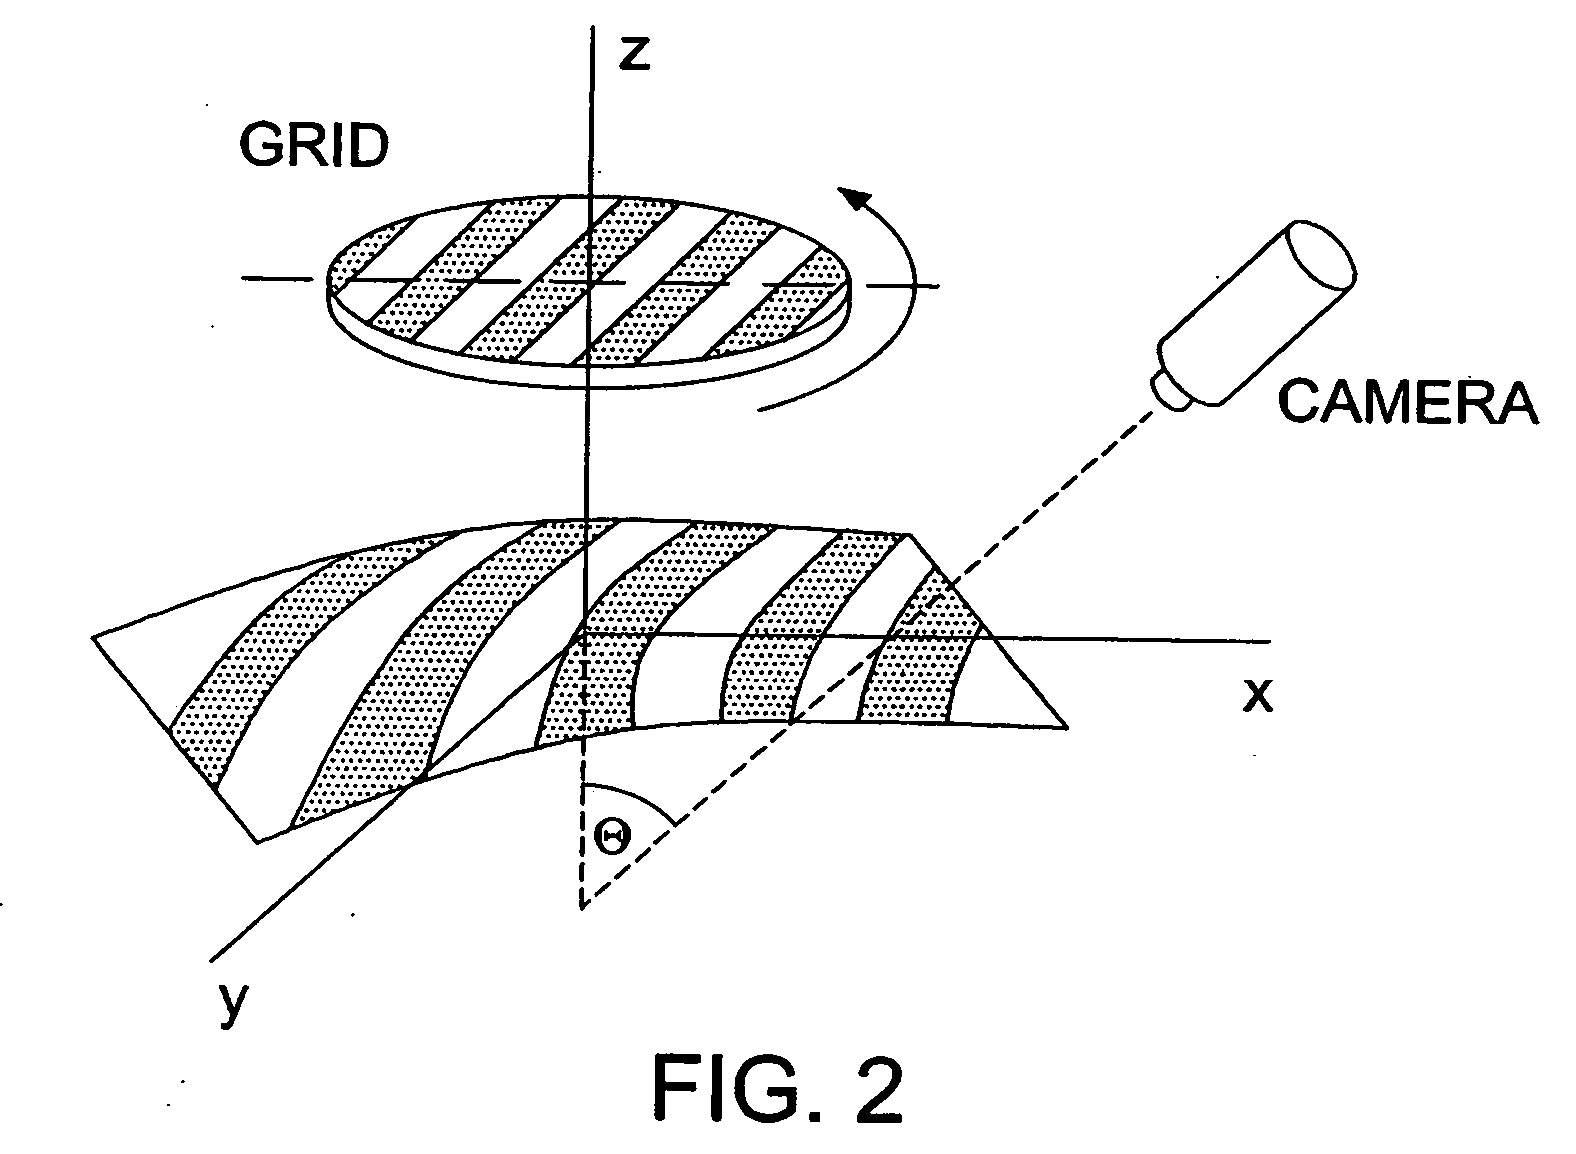 Non-contact apparatus and method for measuring surface profile